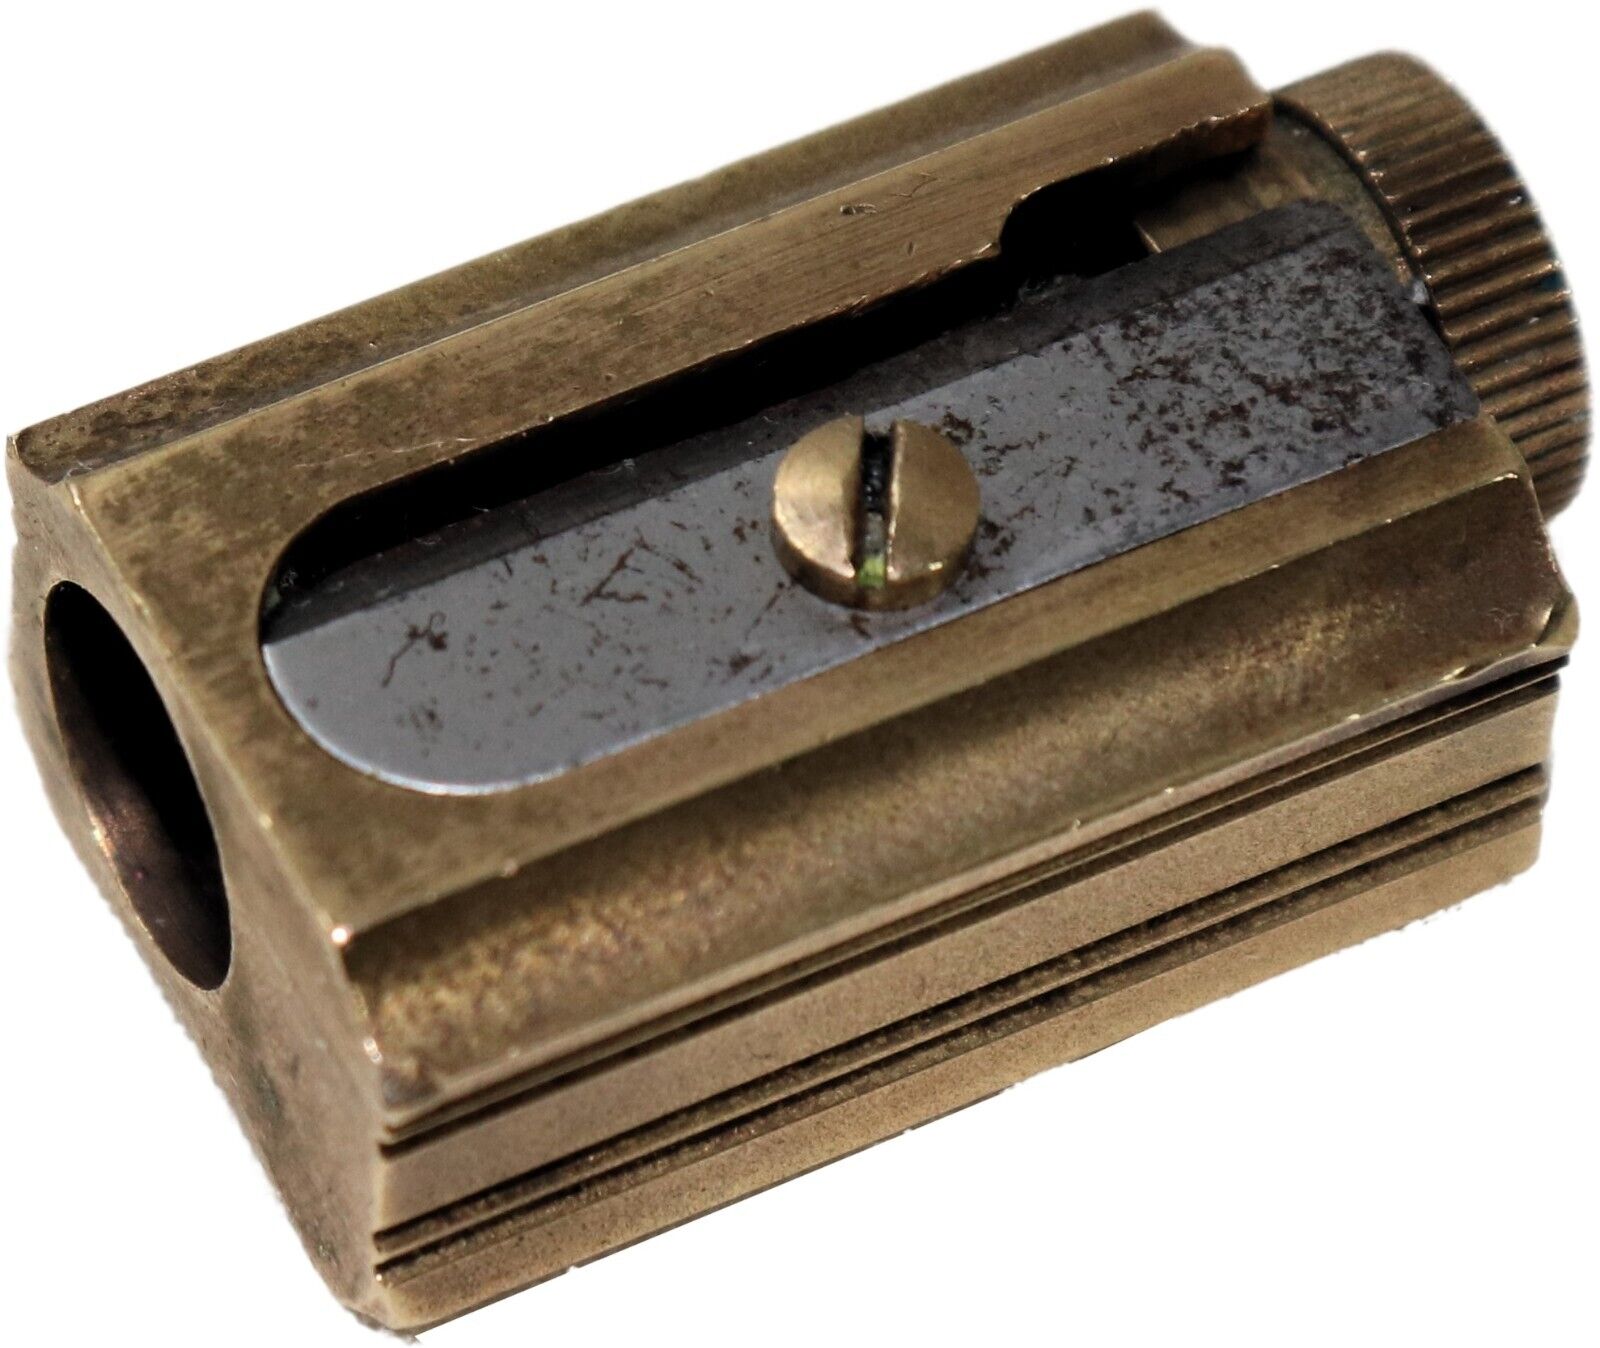 DUX Germany Vintage Brass Adjustable Heavy Pencil Sharpener. From the Year 1940